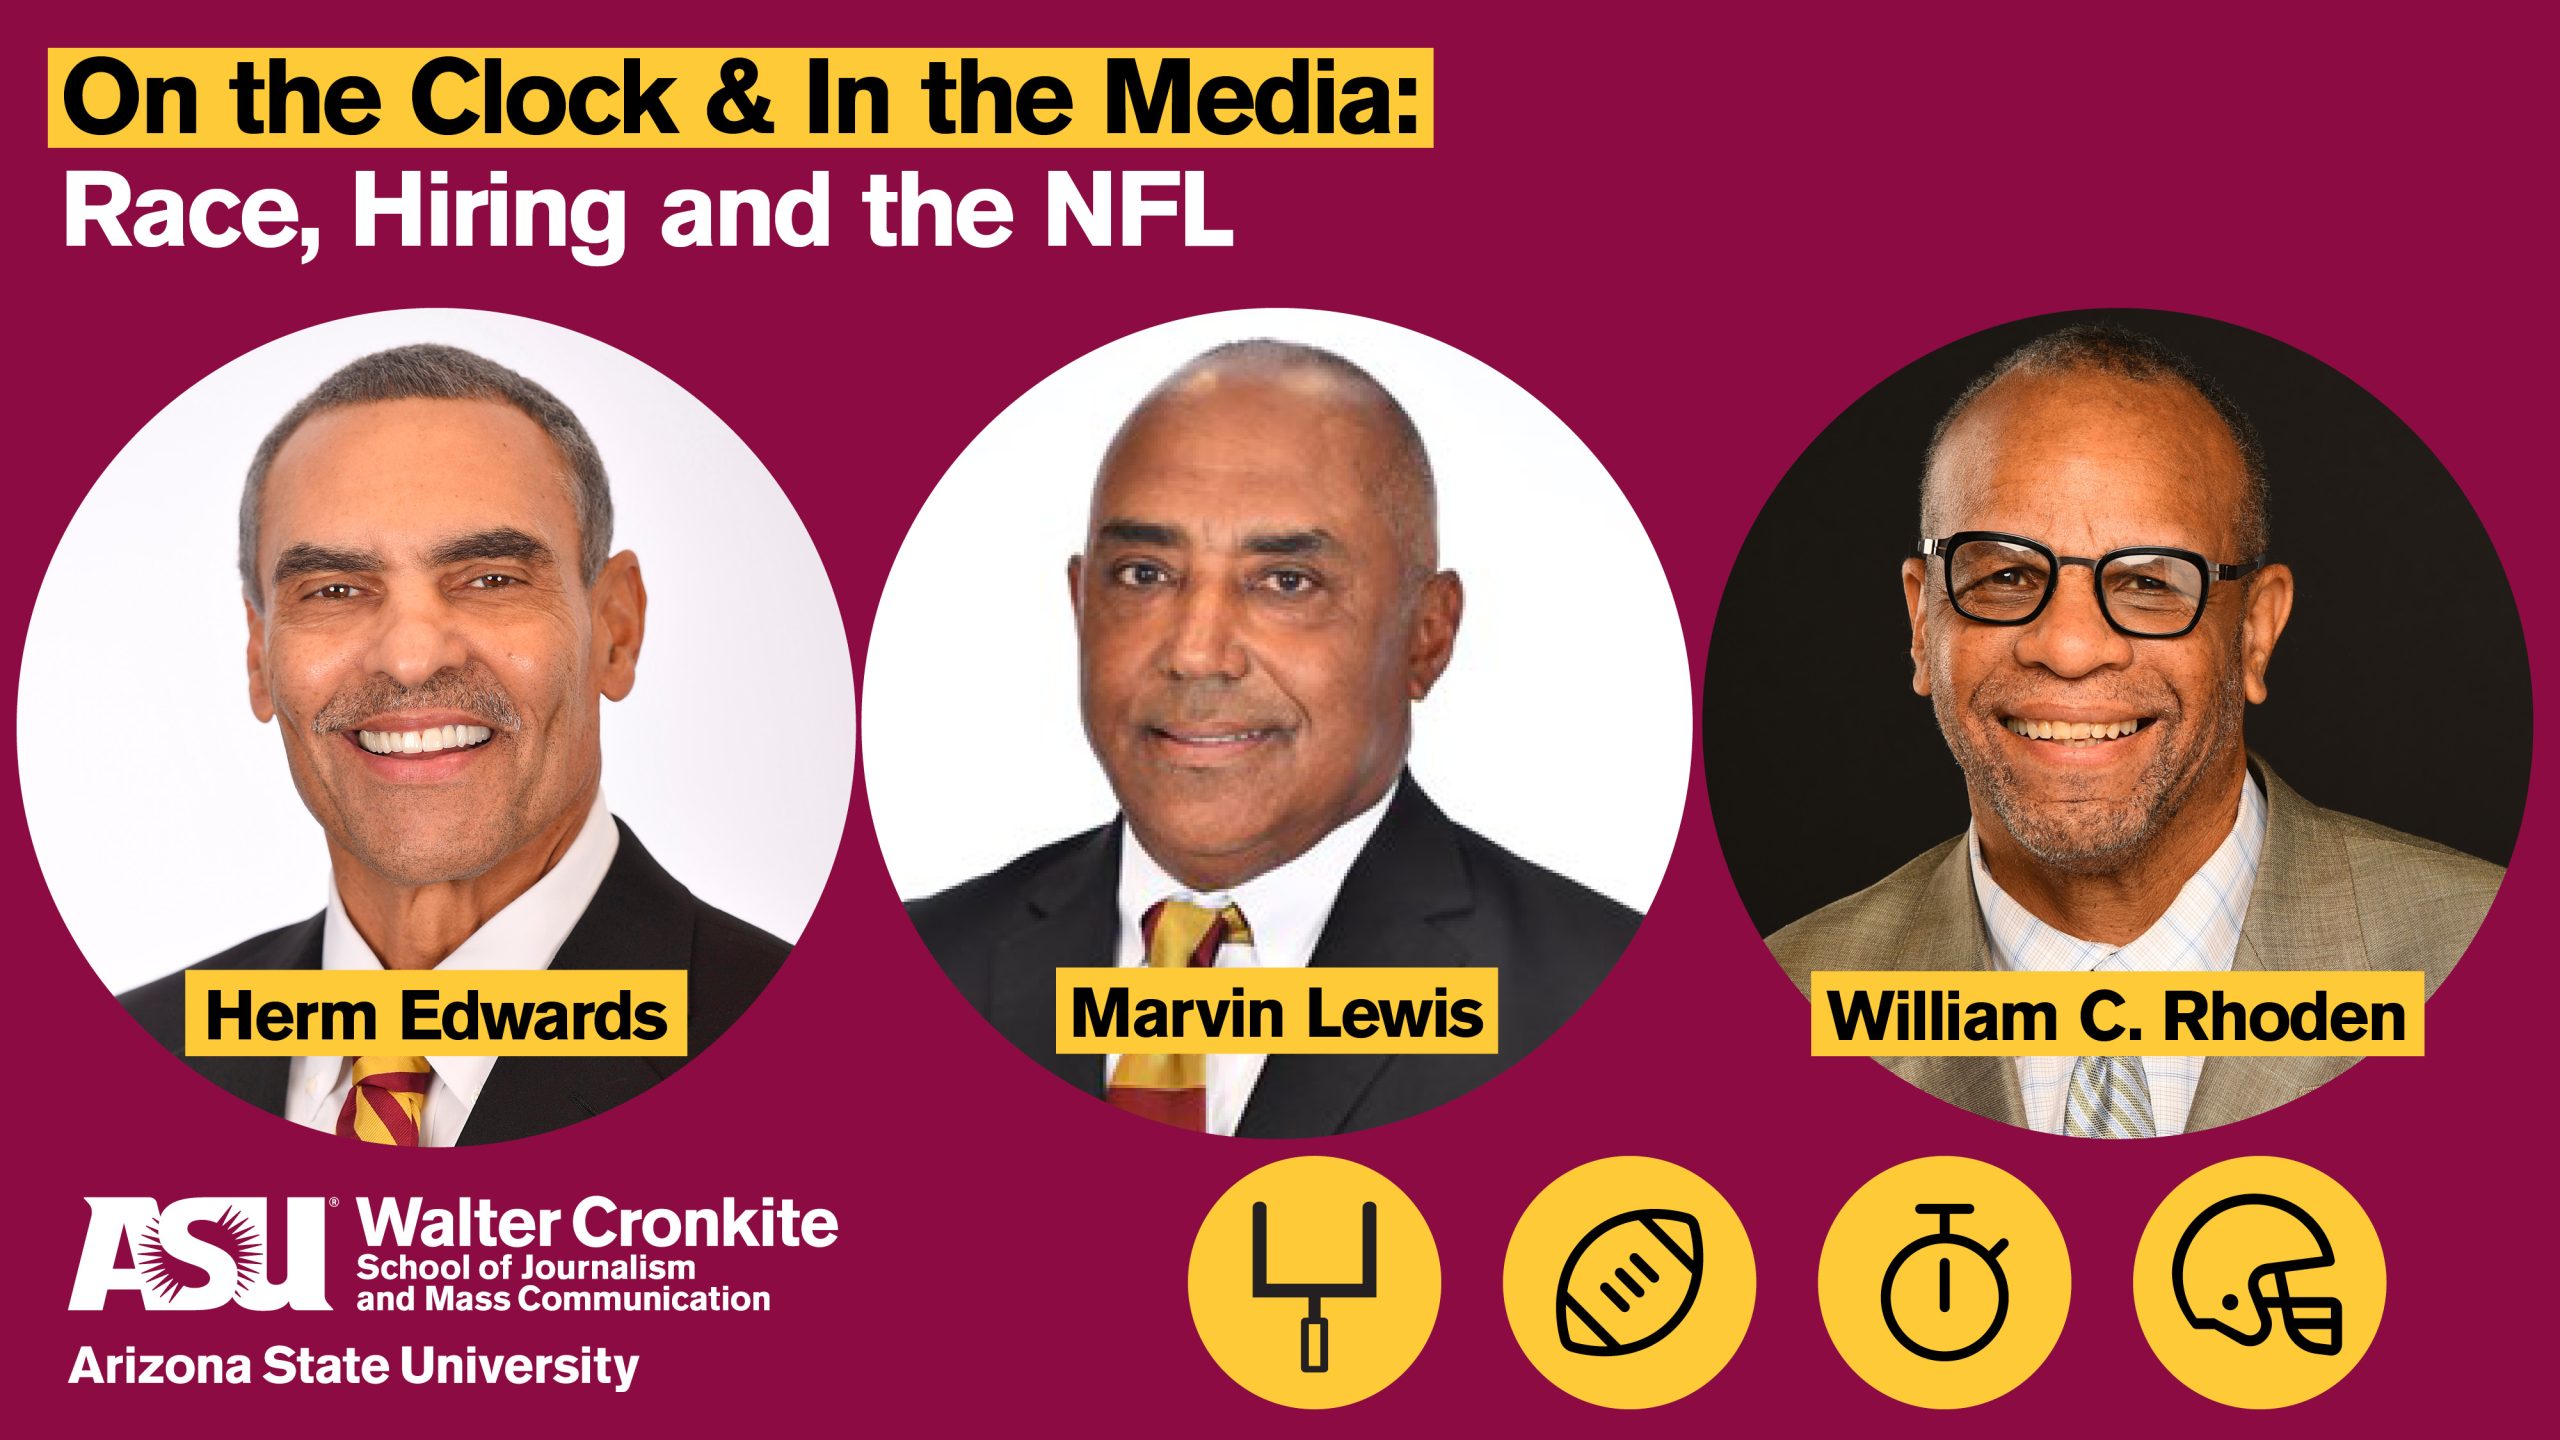 diversity and media in the NFL with Herm Edwards, Marvin Lewis, William C Rhoden 022